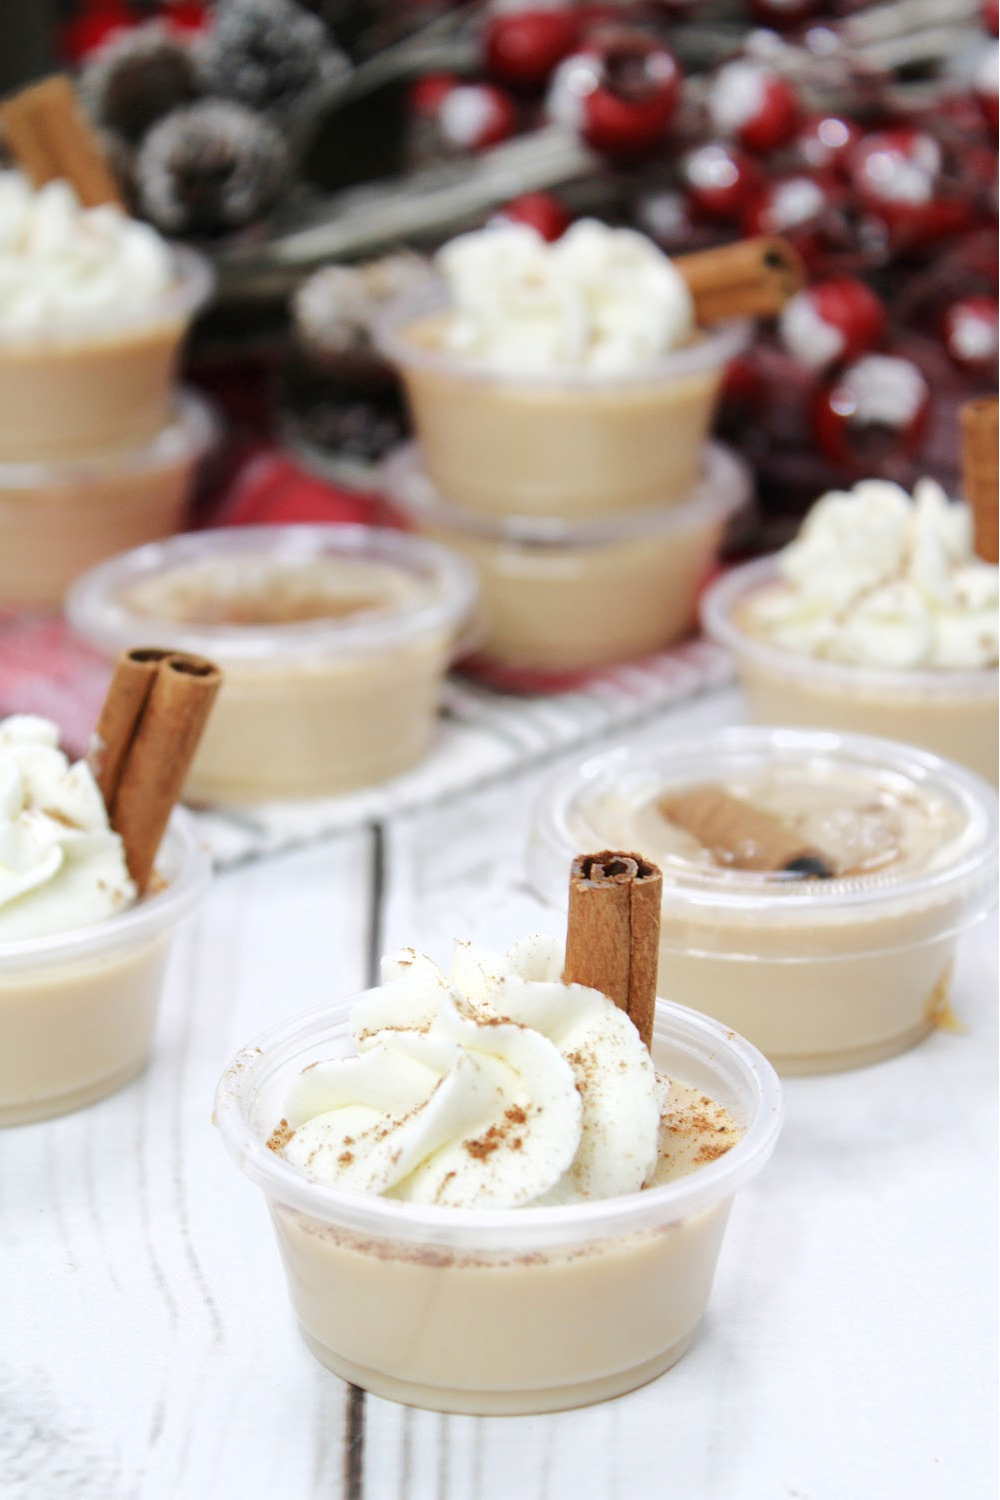 Several Rich and creamy eggnog jello shots topped with whipped cream a sprinkle of nutmeg and garnished with a cinnamon stick.